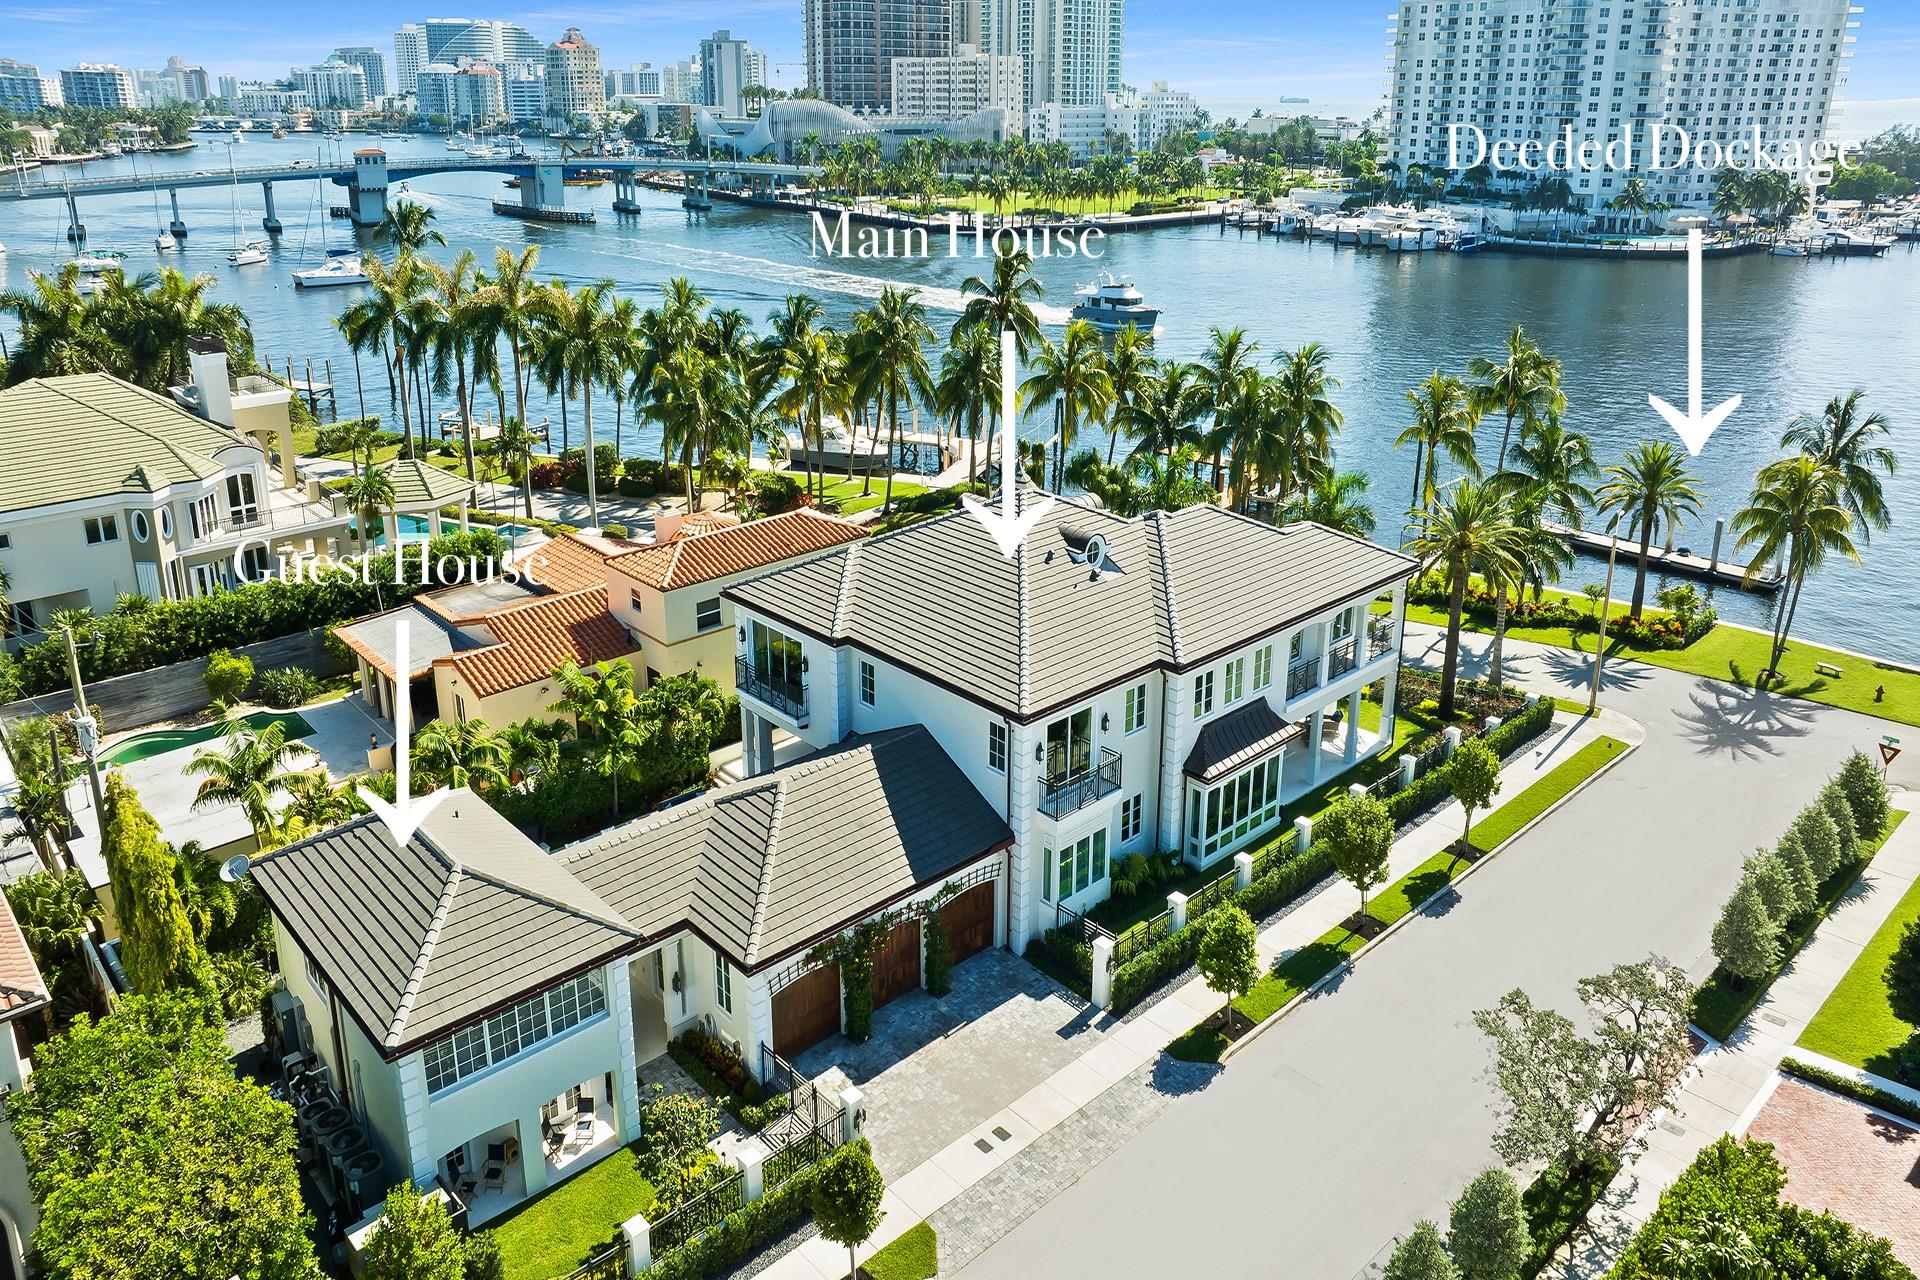 2022 Intracoastal Custom New Construction w/deeded dockage for multiple boats & semi-attached versatile guest house offering endless possibilities to cater to your lifestyle. Experience the ultimate in waterfront luxury that showcases spectacular spanning ever-changing intracoastal views, ensuring no view is ever the same!Adorned for its beauty this contemporary-coastal inspired residence is designed w/luxurious influences & superior craftsmanship, seamlessly customizing indoor/outdoor space w/functionality & pure elegance! Features include; loft, temp controlled wine room, bonus rm, chef&butlers kitchen, elevator, 3 car garage w/rm for lifts, private pool w/summer kitchen. Idlewyld offers its residents; security patrol, video surveillance, no wake zone, direct ocean access,& walkability. Additional Custom Features Include;      Main House: 8' custom stacking sliders off the living area seamlessly blending indoor/outdoor living spaces, 10 1/2' ceilings unique to each room, linen polished marble floors throughout first story and hardwoods on second story, elevator, dome vaulted plaster ceiling in foyer, saltwater aquarium, detailed custom millwork, solid double doors, natural gas, fireplace. Main and guest house water filtration system. The chef's Kitchen offers book-matched porcelain countertops, custom cabinetry by Kitchenworks, appliances include; Dual Sub zero refrigerator, 48' Wolf natural gas range, dual ovens, griddle, oversized kitchen island. Fabulous spacious full butlers kitchen perfect for storing/hiding counter appliances and keeping the main island free of clutter, equipped with Wolf steam oven & microwave, 2-wolf warming drawers, Miele dishwasher, pantry. Club room is the perfect space for relaxing and entertaining offering; 8' sliders onto patio, built in bar with Quartzite bar top, sub zero beverage cooler, ice maker, & under counter lighting. Surround sound throughout, custom window blinds and plantation shutters. Beautiful guest bath with gorgeous inlay tile. First floor ensuite/media/office. Walk in wine vault. Second story laundry. Primary suite offers tongue and groove vaulted ceiling, epic panoramic intracoastal and garden views, private sitting niche overlooking the water! Gorgeous bath with marble inlay tile, 2 separate vanities, dual shower, plenty of storage, natural light, and fabulous Intracoastal & garden views! 3 spacious ensuite guest suites with walk in finished closets, vaulted ceilings, and waterway and garden views! 2nd story loft and hall bathe in sunlight and epic panoramic views of the intracoastal, 10 1/2' ceilings! 3rd story bonus room.      Guest House: Semi attached versatile guest house with private entry and patio that boasts; open concept living area with fully equipped kitchen, living area, half guest bath with washer and dryer, and 2 bedrooms each with its own private ensuite bathroom. This space can be appreciated as is or be transformed - endless possibilities to create a space the fits and exceeds your families ever-changing needs.      Deeded Dockage:  Unique Deeded Dockag for multiple boats in a no wake zone with direct ocean access, just minutes to the Atlantic! 5' setback. There is a city easement on the south side, which allow 25' between you and your neighbor, this makes navigating easy and gives you and your crew privacy.  Dockage can accommodate multiple boats or water toys. Current owner had a 72' Viking on the Bellingham floating dock + 16,000 boat lift + a 40' on the inside.  Your own mini marina!       Garage; 11.5 ceiling height offers room for lifts, 3 car garage, AC, pull down attic access for storage, craftsman work bench, charging station, W/D hook up, ADT and security cameras.  Outside parking and guest parking.      Exterior Design Elements: Captivating intracoastal views from the front patio sitting area. A private sitting/viewing patio at the dock. This residence is completely fenced and gated for secure privacy. Private Poolside Oasis offers;  heated saltwater pool and spa with sun shelf and water feature. Summer kitchen with grill and sink.  Fabulous covered patio offering surround sound, lighting, fans and the 8' sliders off the club room allow for easy inside/outside living and entertaining.  Limestone pavers, gravel pathways, lush landscape and gardens, landscape lighting, copper gutters and downspouts.      Additional Features;  full house generator, natural gas, tankless water heaters, 4 Trane HVACs;  4 AC's; 1-first floor, 1-second floor, 1 primary suite, 1 guest house.